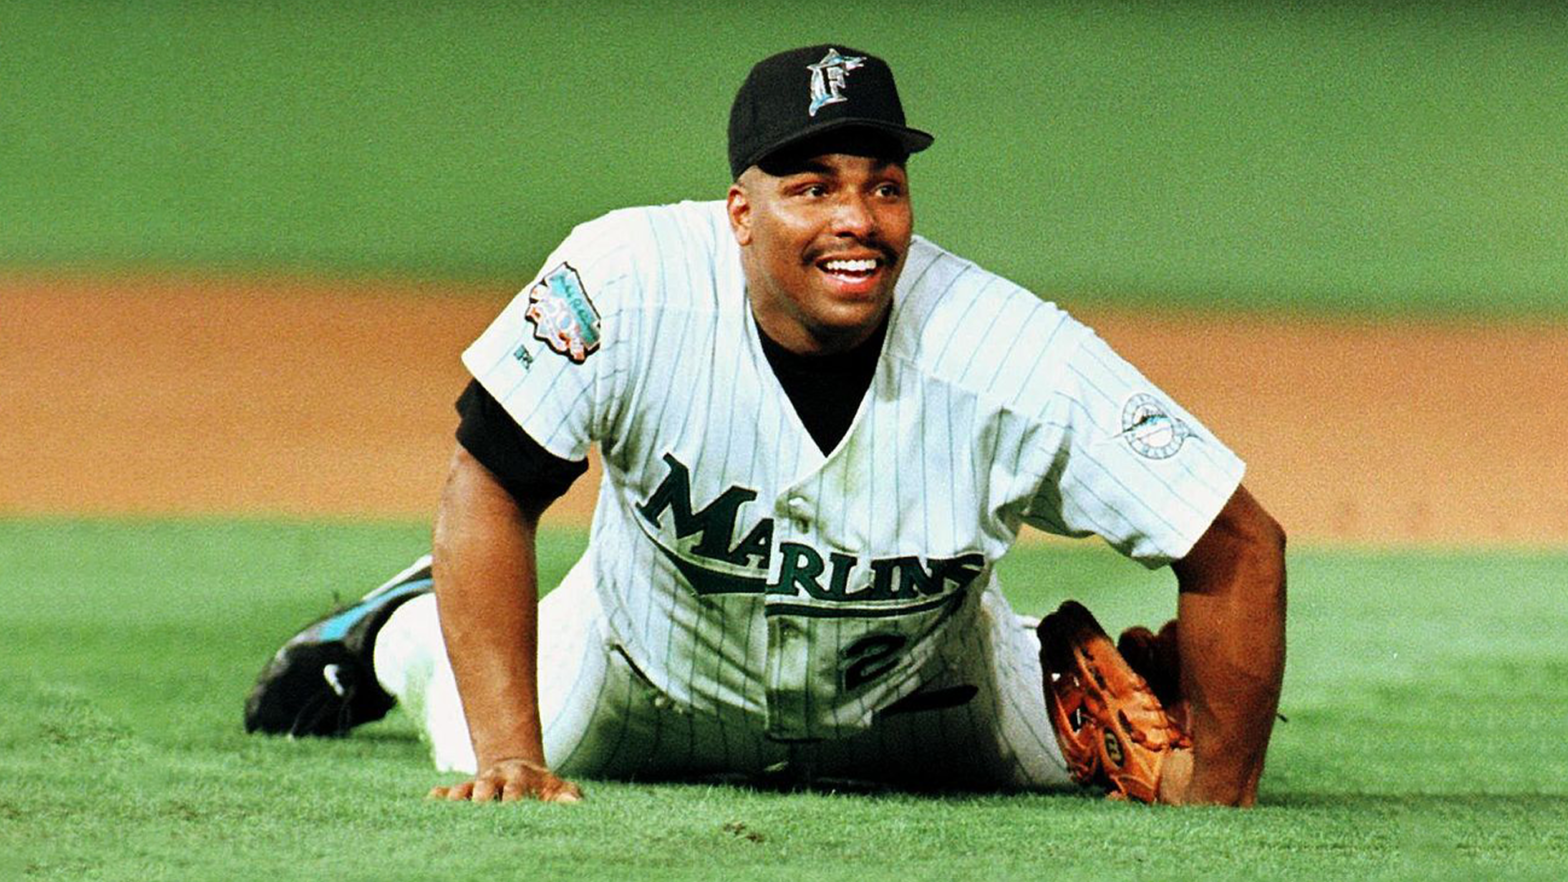 MLB Player Bobby Bonilla Retired In 2001, But The New York Mets Still Pay Him $1.2M Every Year